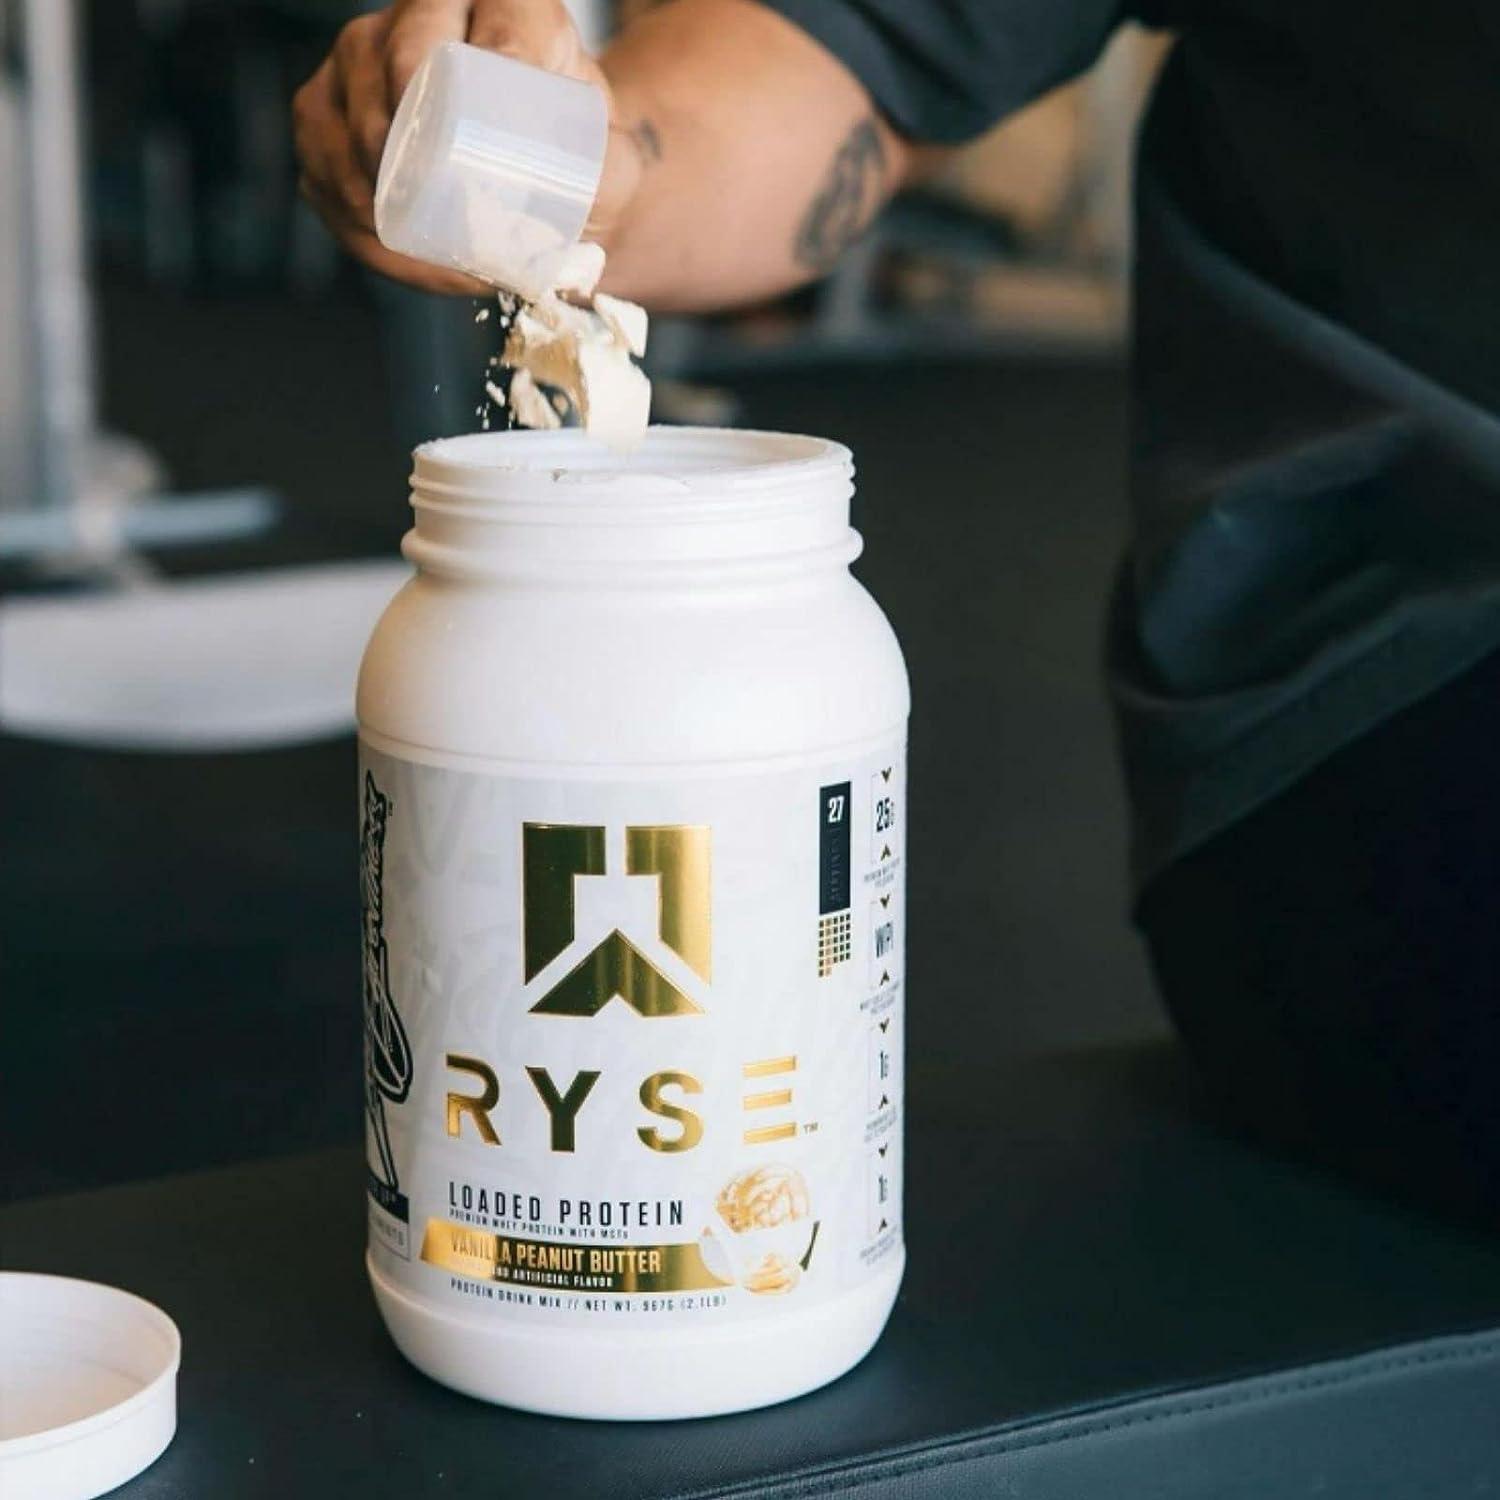  Ryse Loaded Protein Powder, 25g Whey Protein Isolate &  Concentrate, with Prebiotic Fiber & MCTs, Low Carbs & Low Sugar